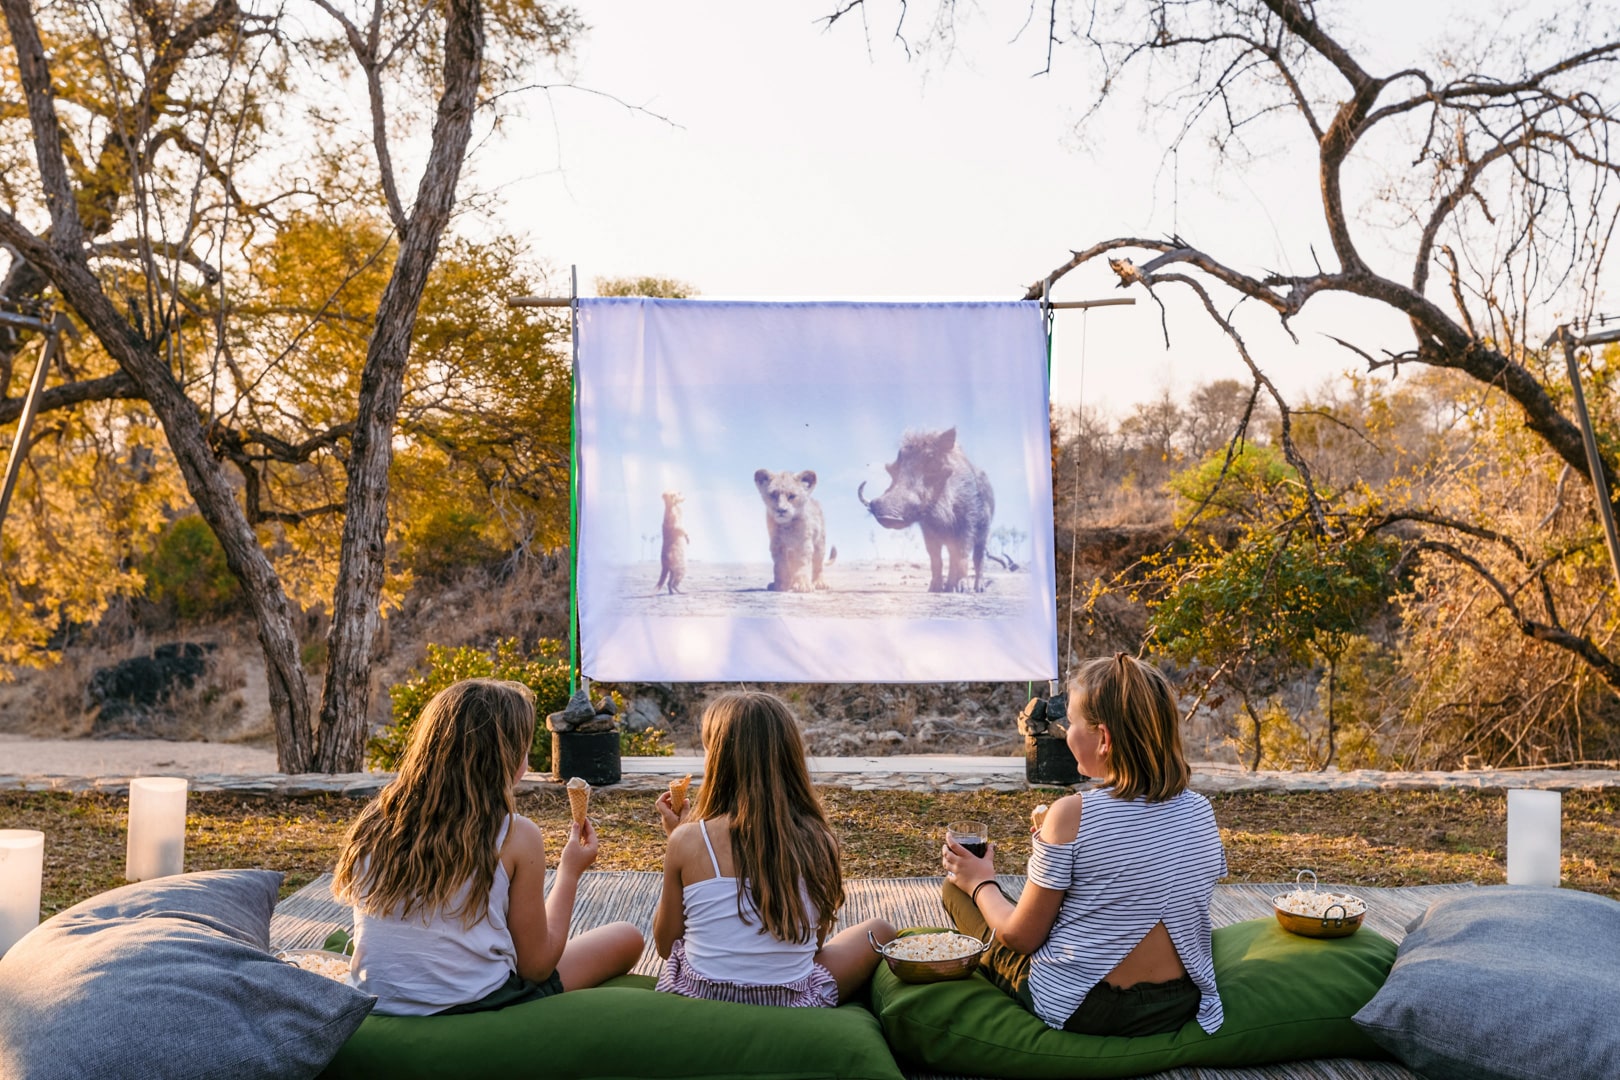 Kids watching a movie on a projector at Thornybush Game Lodge – one of Southern Africa’s best family friendly lodges.